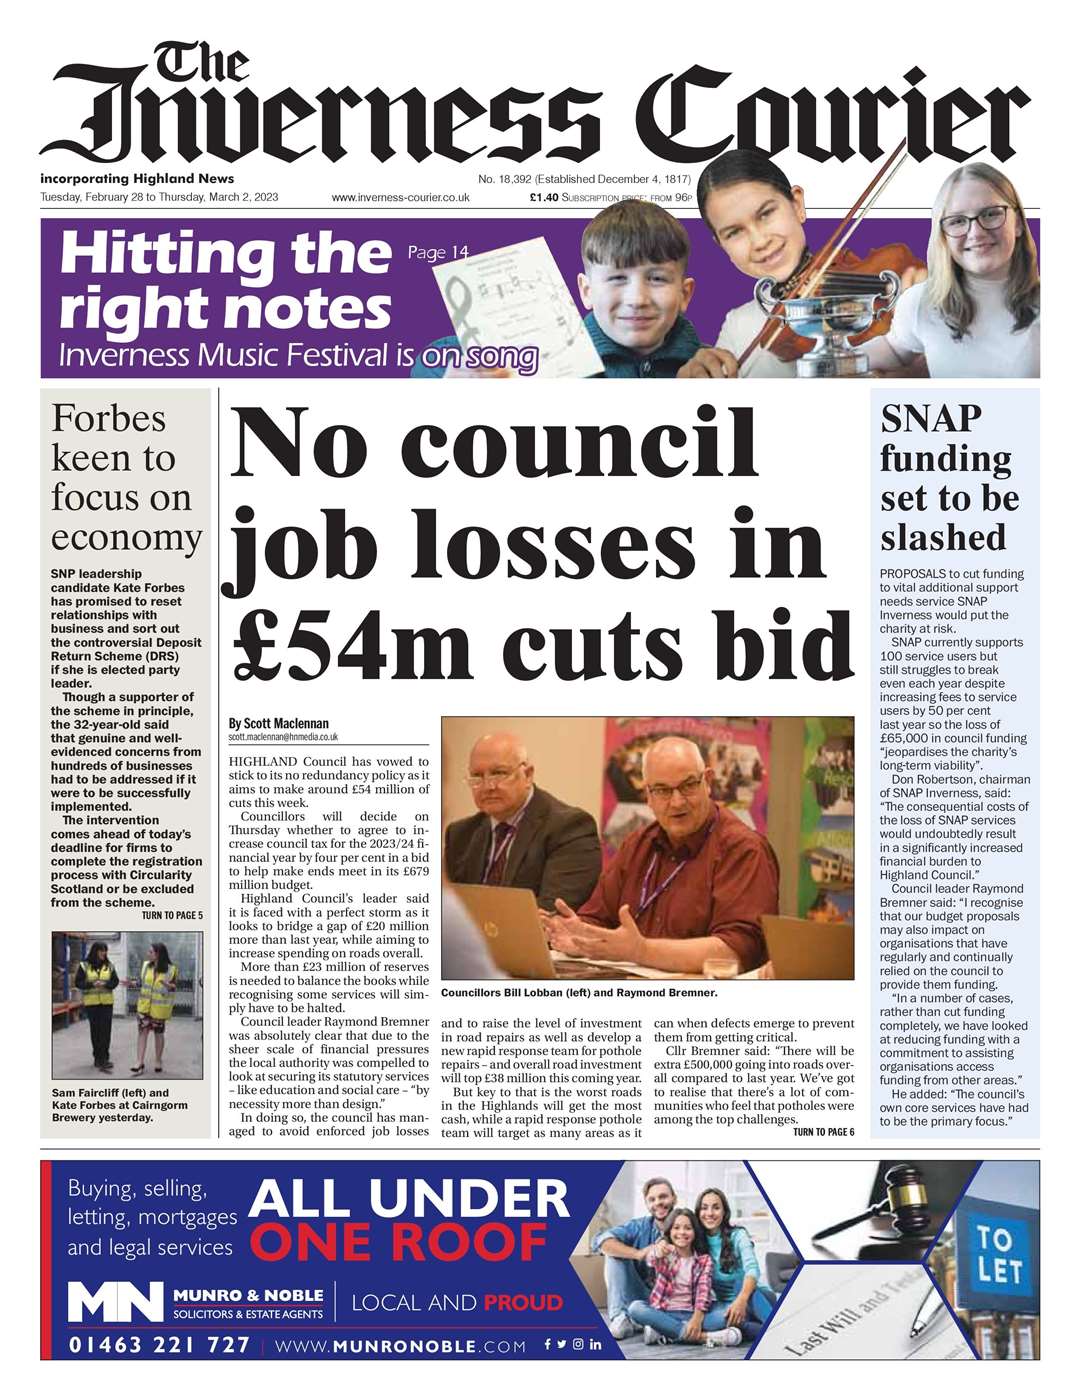 The Inverness Courier, February 28, front page.